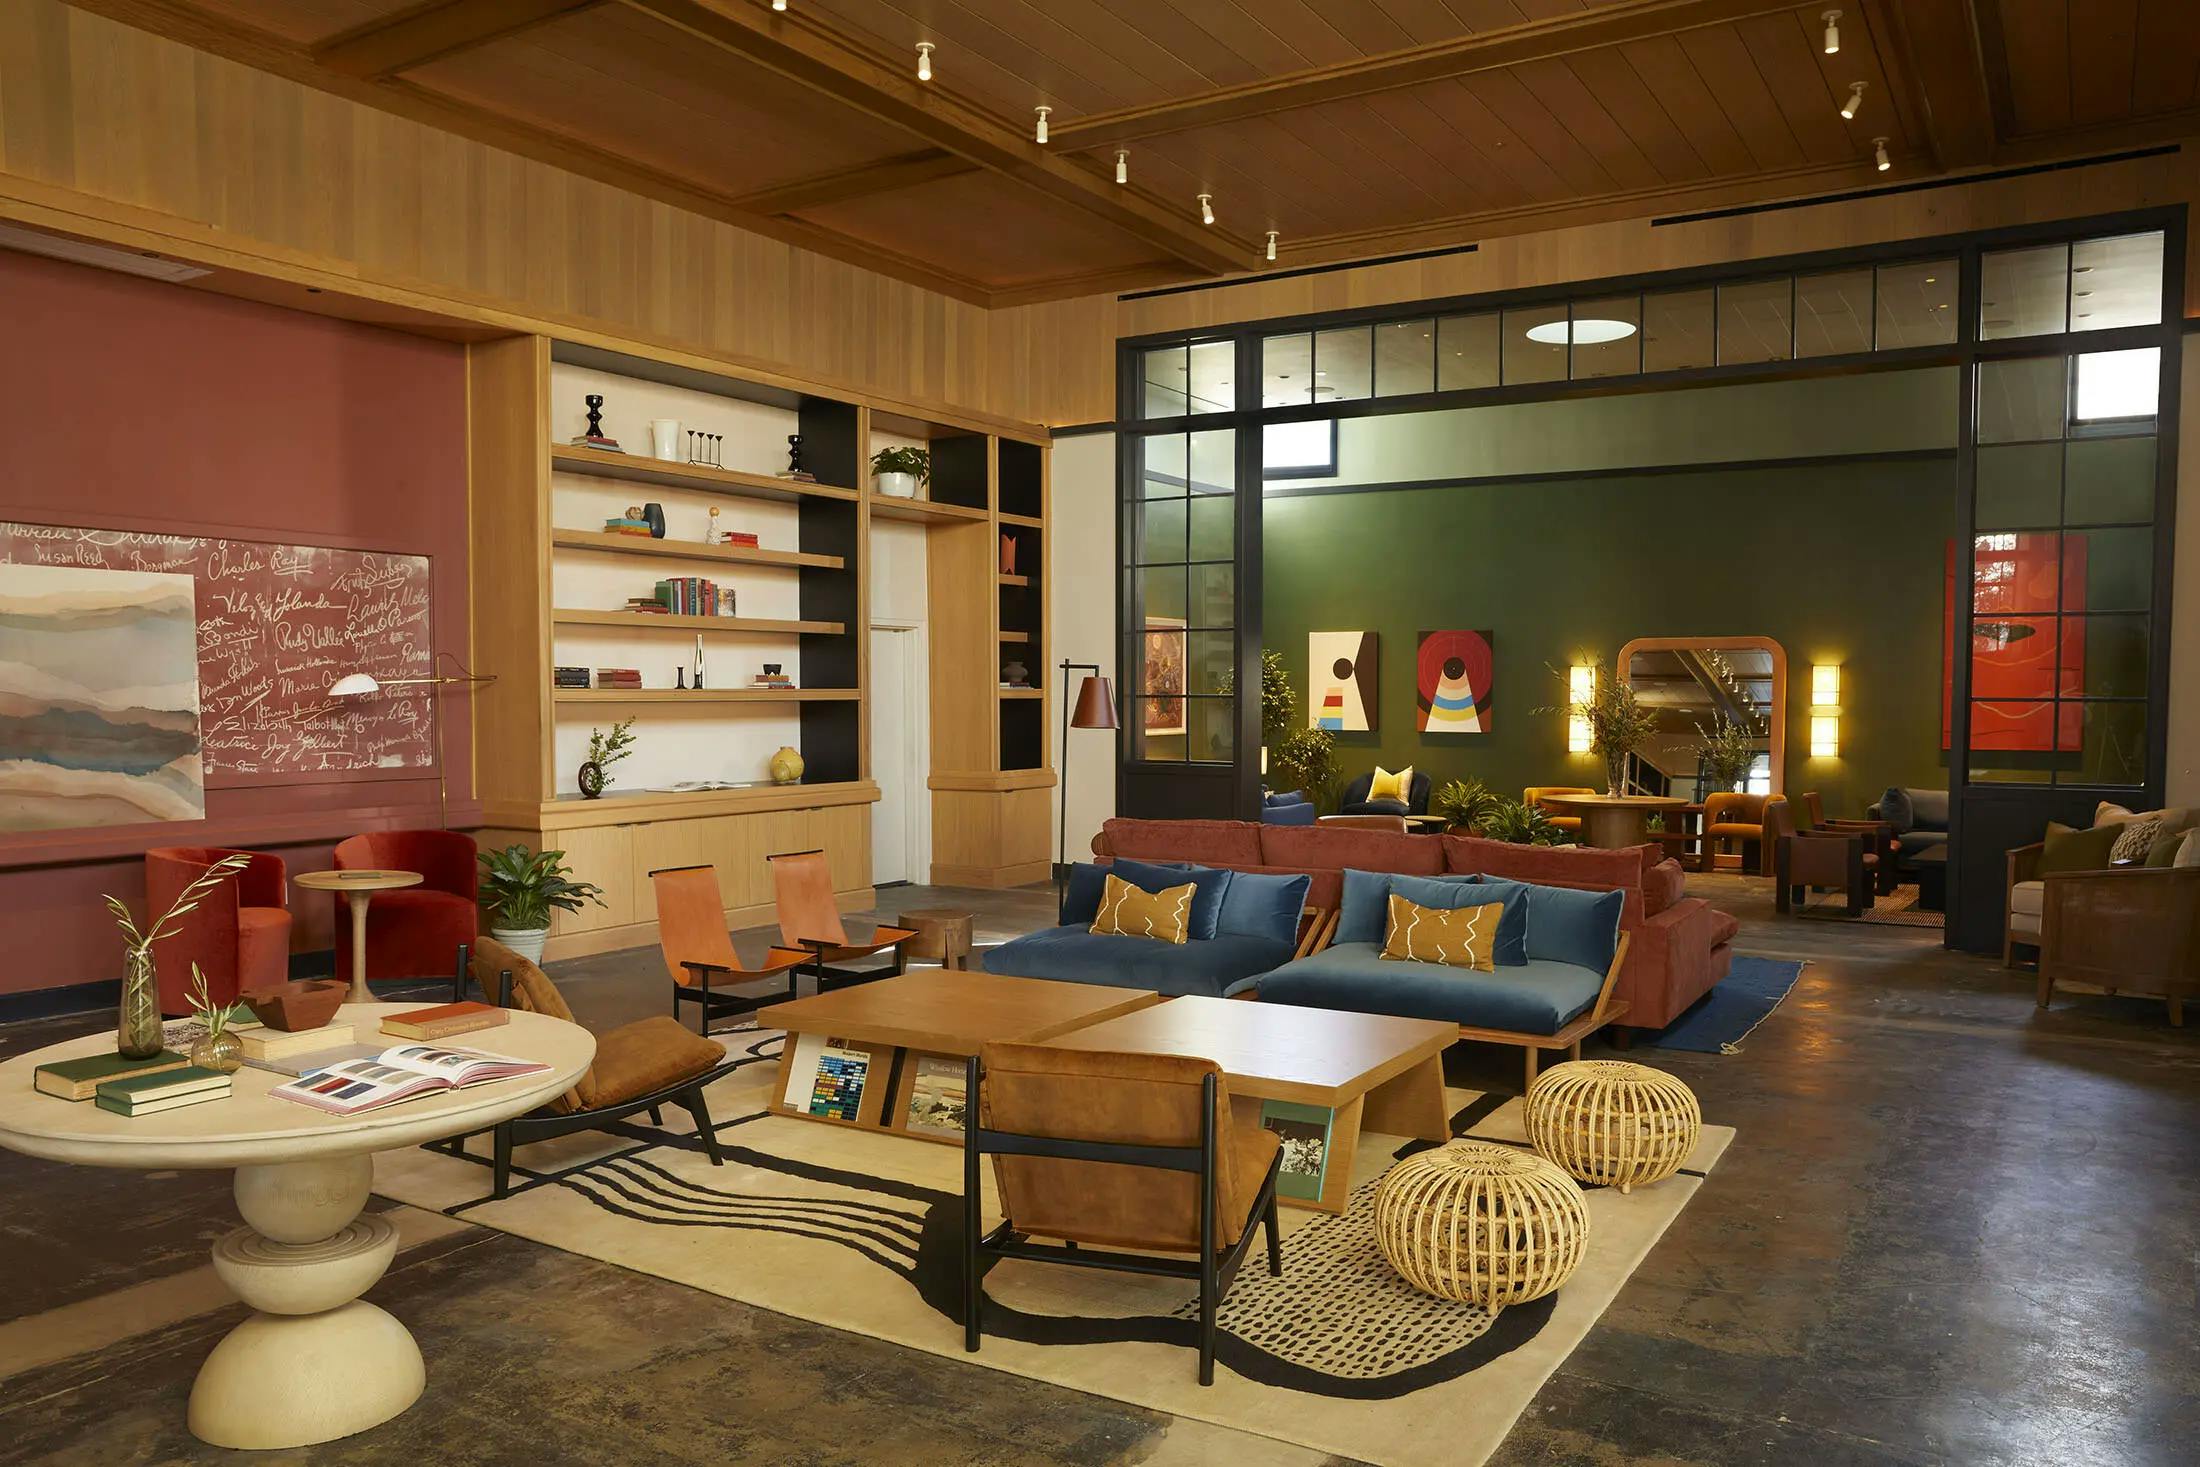 A lounge area with conversational seating and bookcases at the Chief Los Angeles Clubhouse.